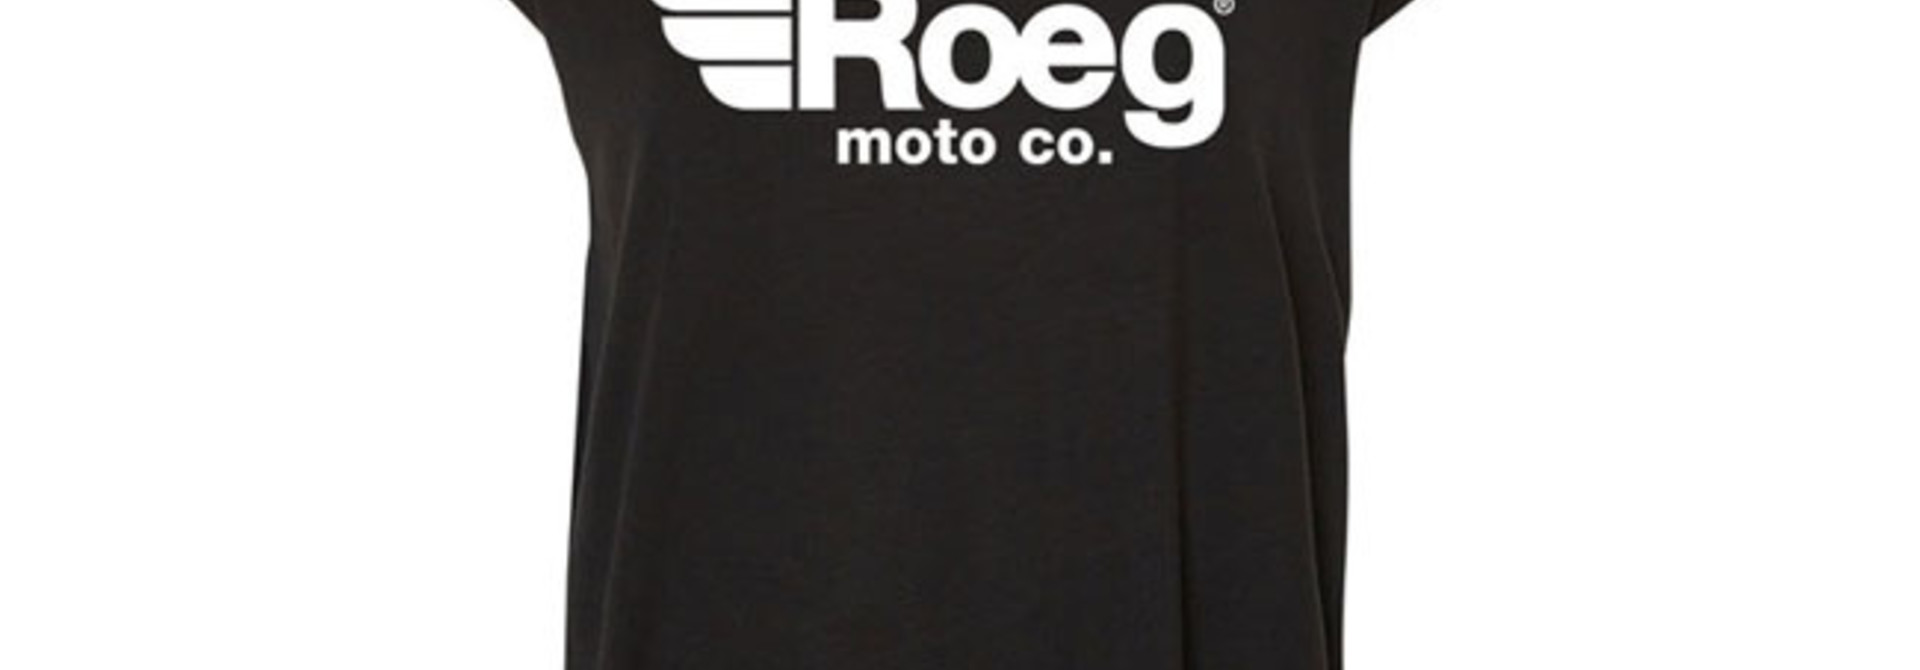 The ROEG® Lady black T-Shirt is made with pure cotton for all-day comfort.